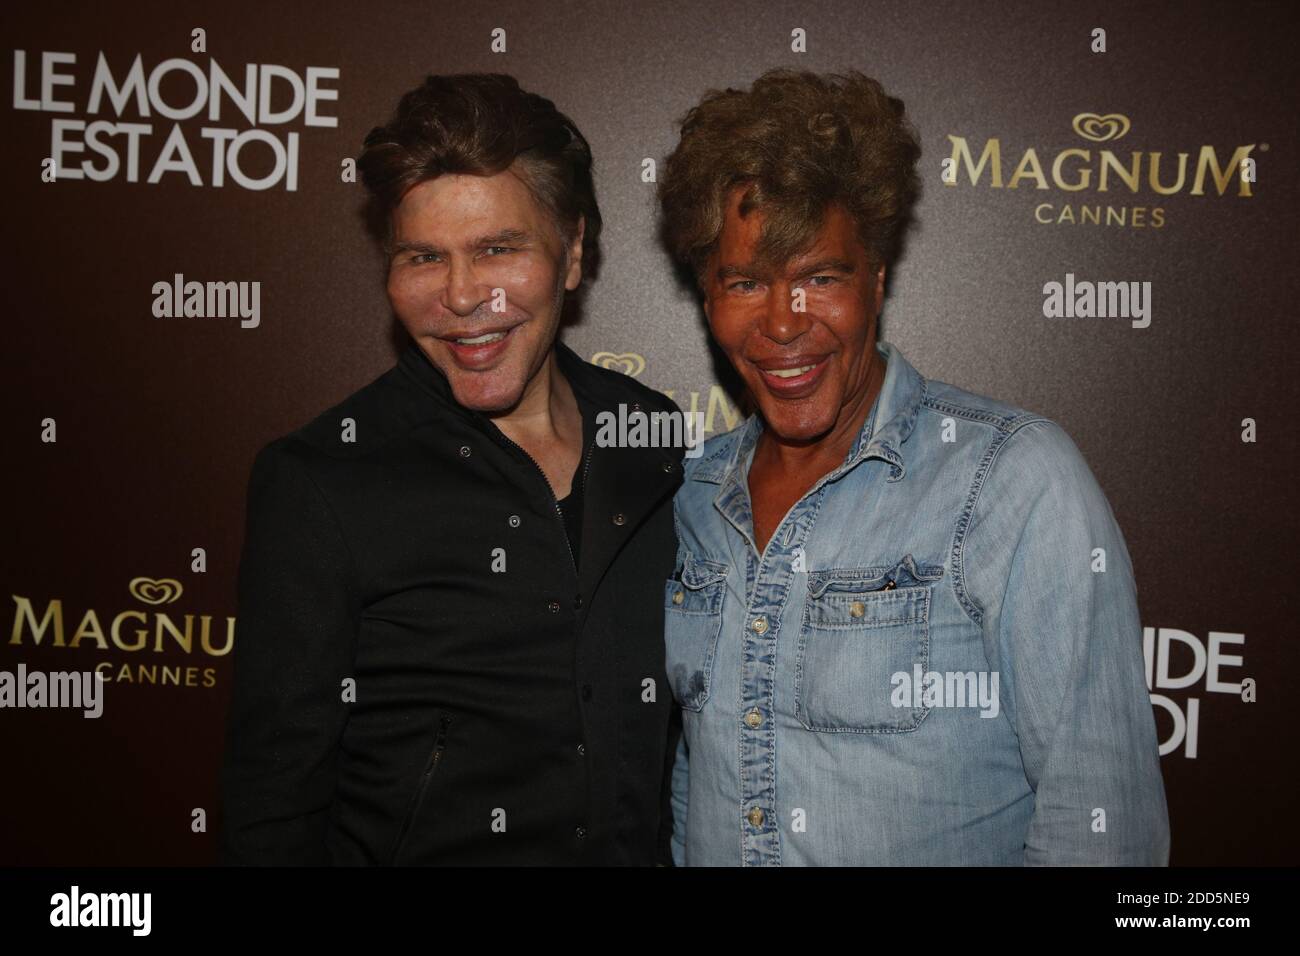 Igor and Grichka Bogdanoff attending Le Monde est a toi Party held at Plage  Magnum during The 71st Annual Cannes Film Festival on May 12, 2018 in Cannes,  France. Photo by Jerome